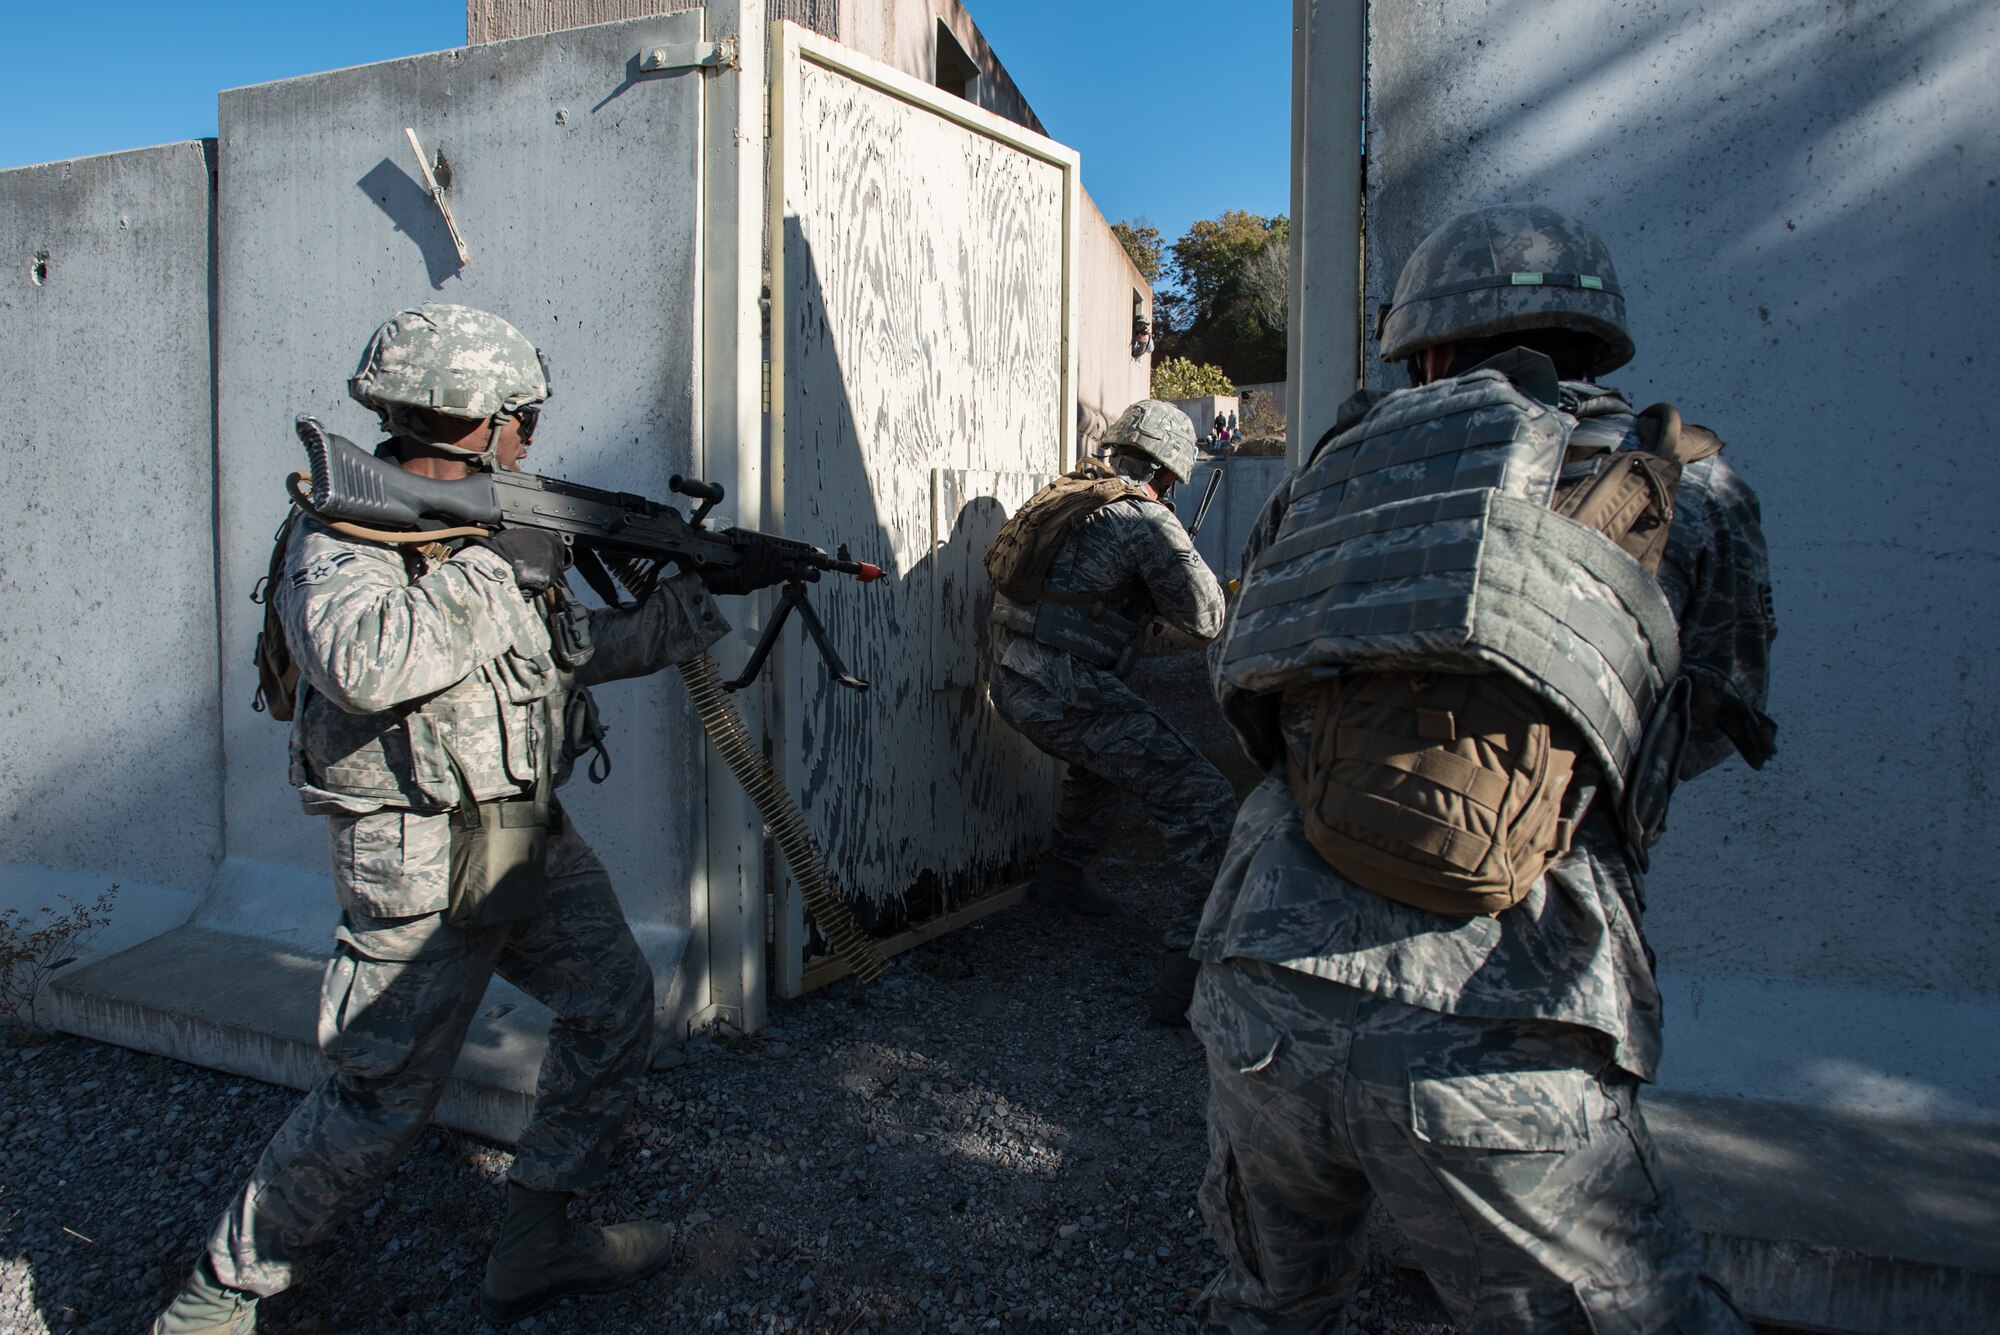 Fire Team members from the Kentucky Air National Guard’s 123rd Security Forces Squadron conduct training to recover a downed pilot inside a simulated Afghan Village at Fort Knox, Ky., Oct. 20, 2015. The Airmen were required to execute a coordinated search while defending their positions and engaging hostile enemy forces. (U.S. Air National Guard photo by Maj. Dale Greer)